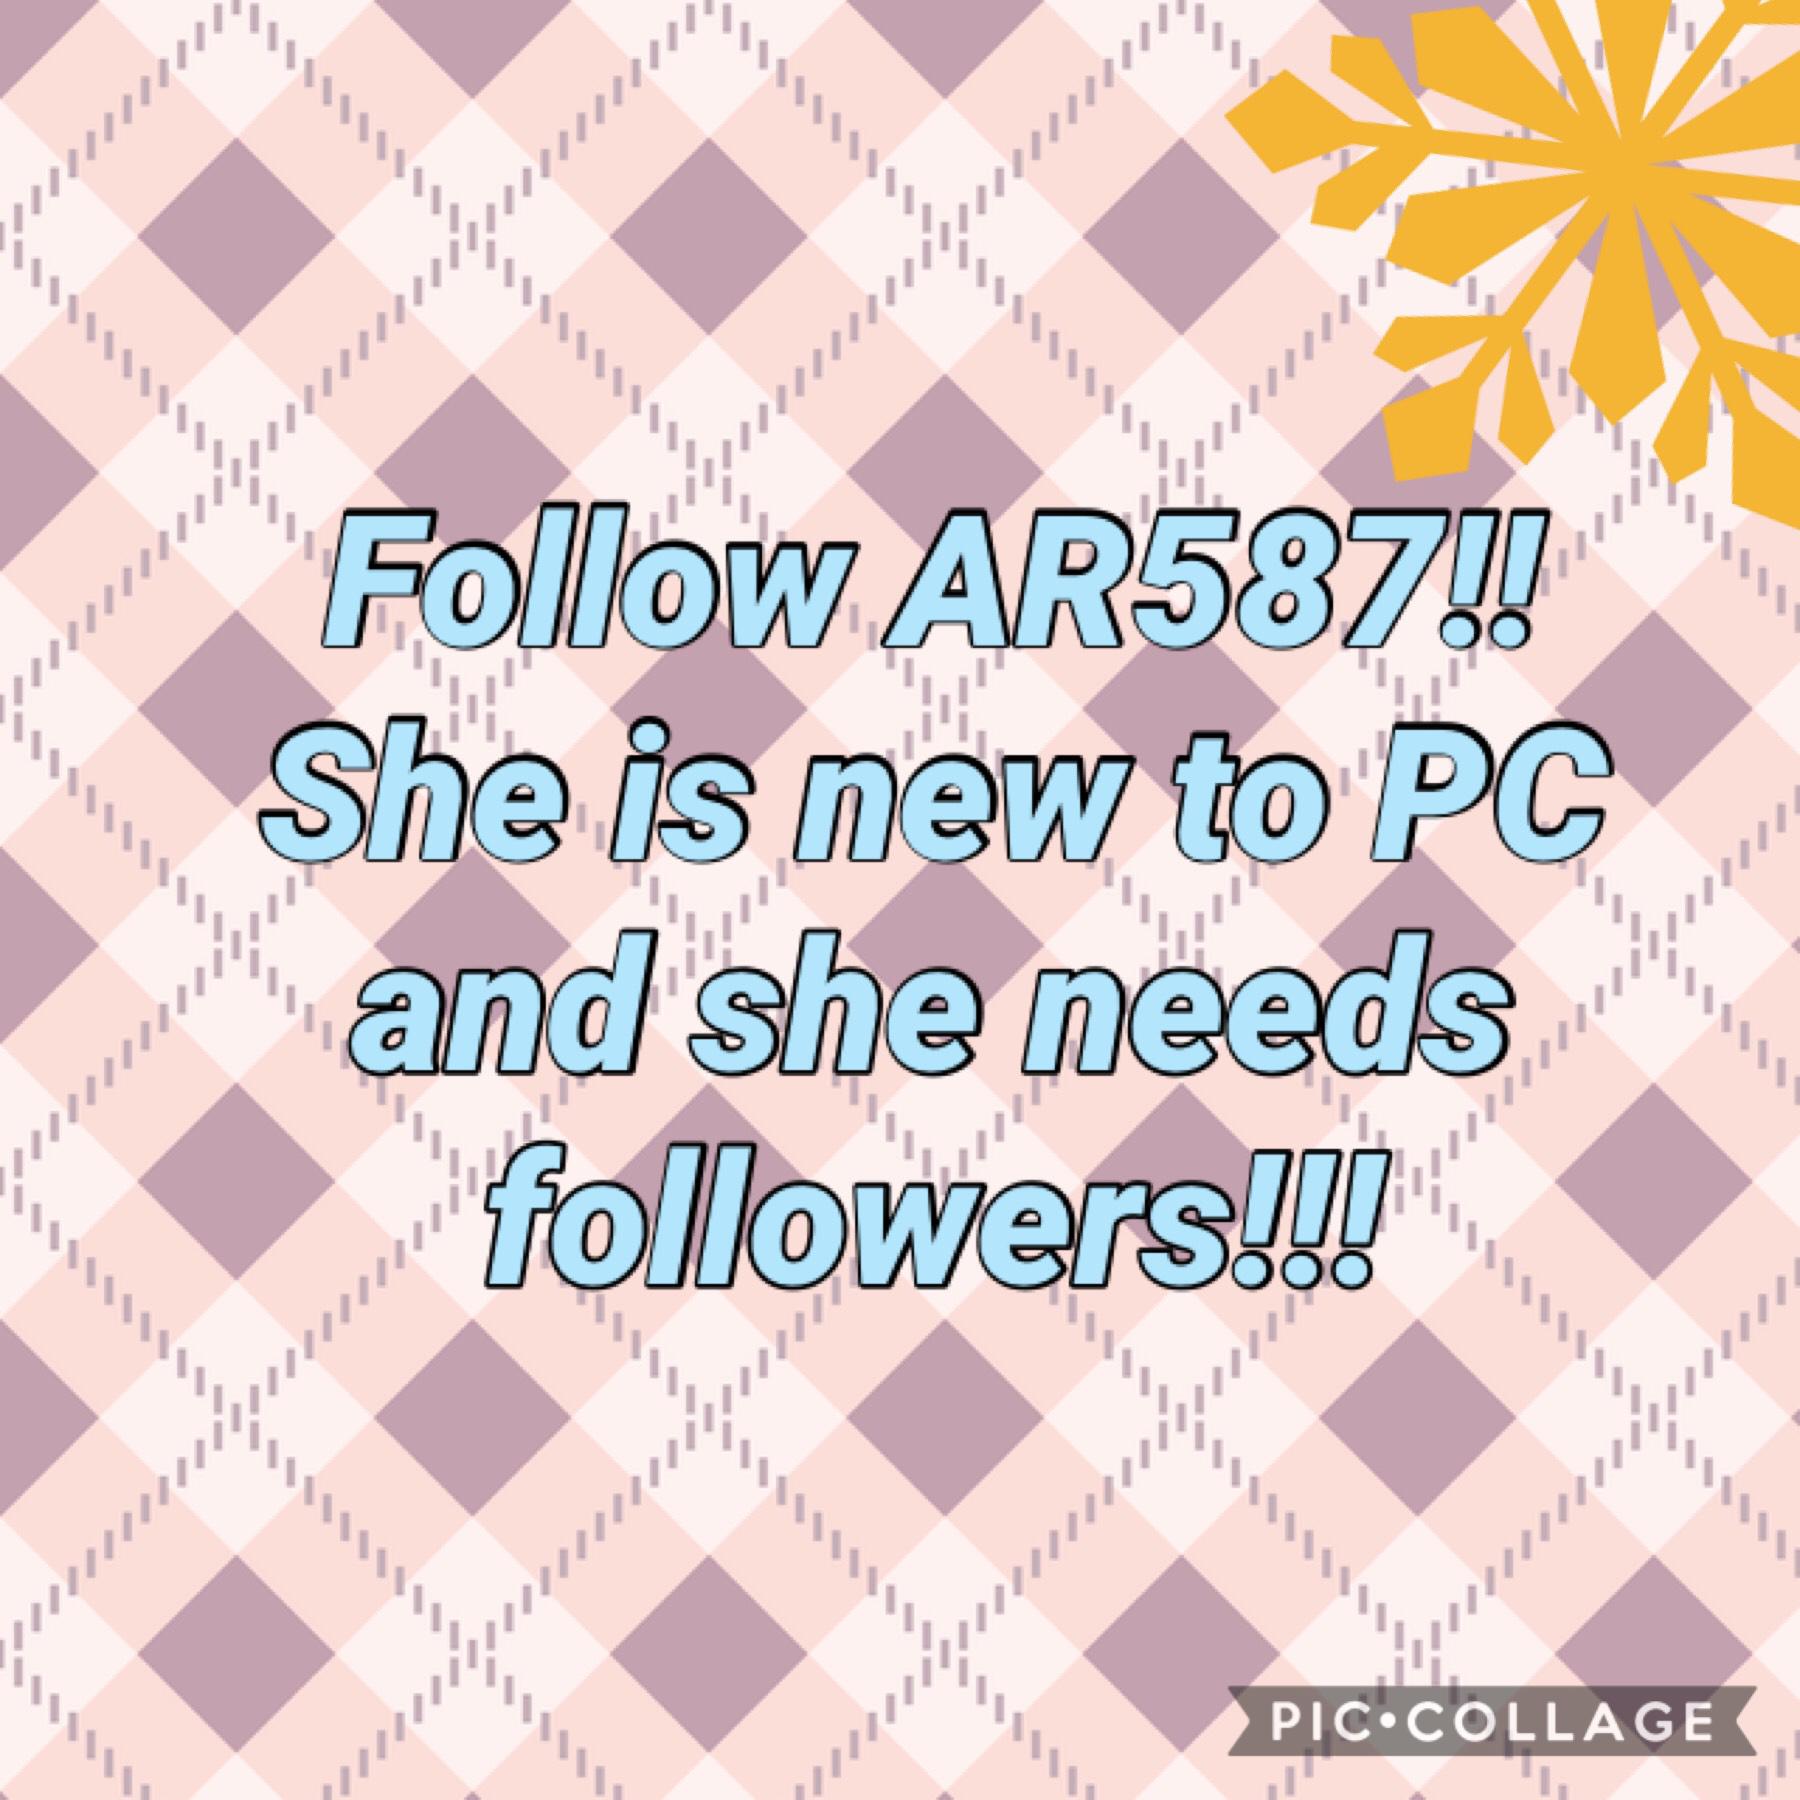 Help AR587 get to 50 followers!!( BTW she is my sister so I am trying to help her😊)